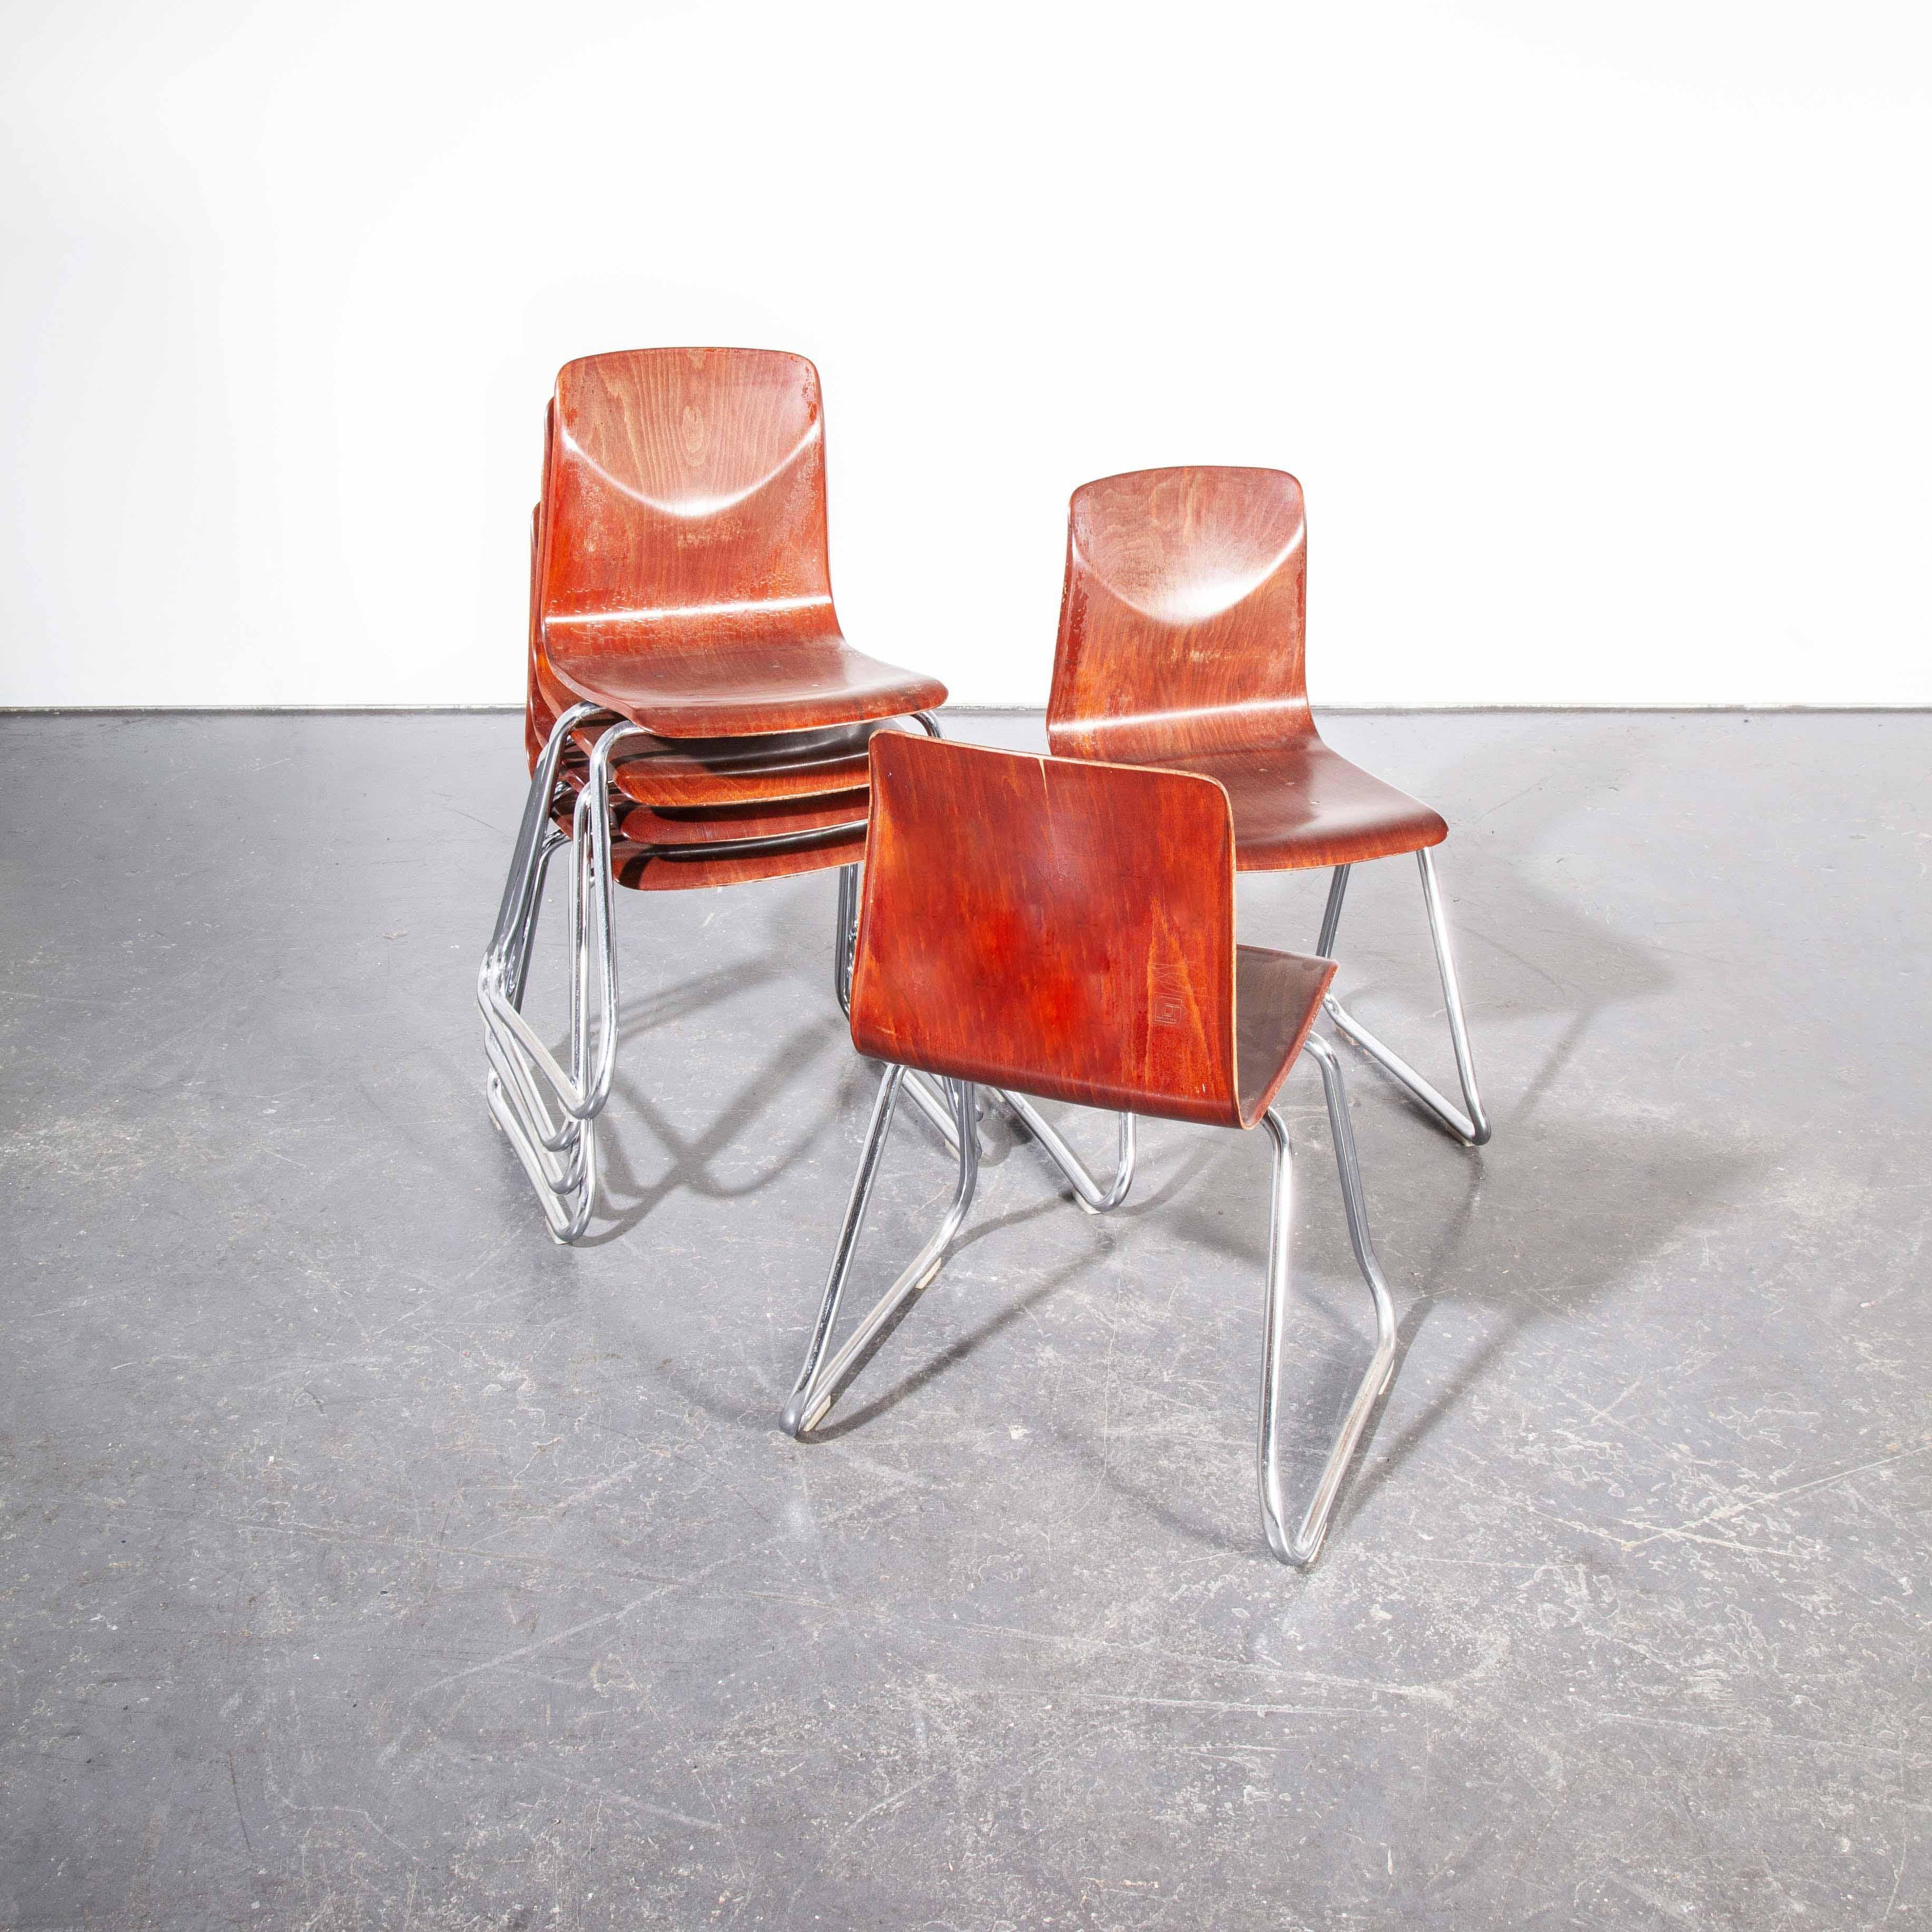 1960s Pagholz dining chairs made in laminated hardwood with chrome legs, set of six. Pagholz is an interesting West German company that perfected the manufacturing technique to make laminated furniture with complex multiple shapes. Pagholz seats are